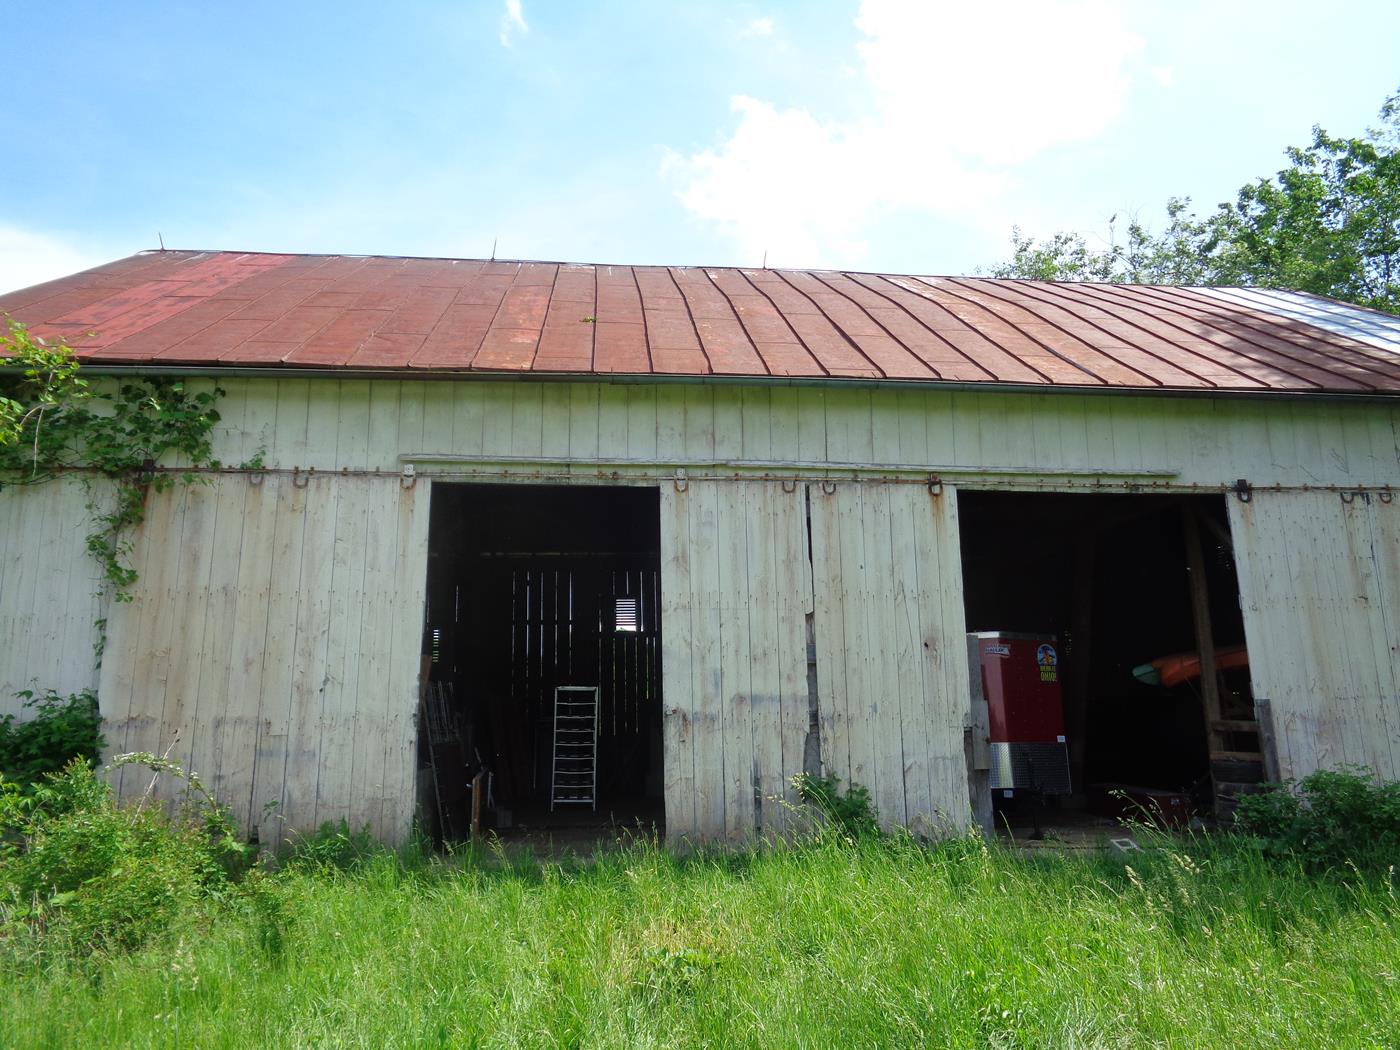 Ohio Valley Barn Salvage - Tugend Road Barn Frame